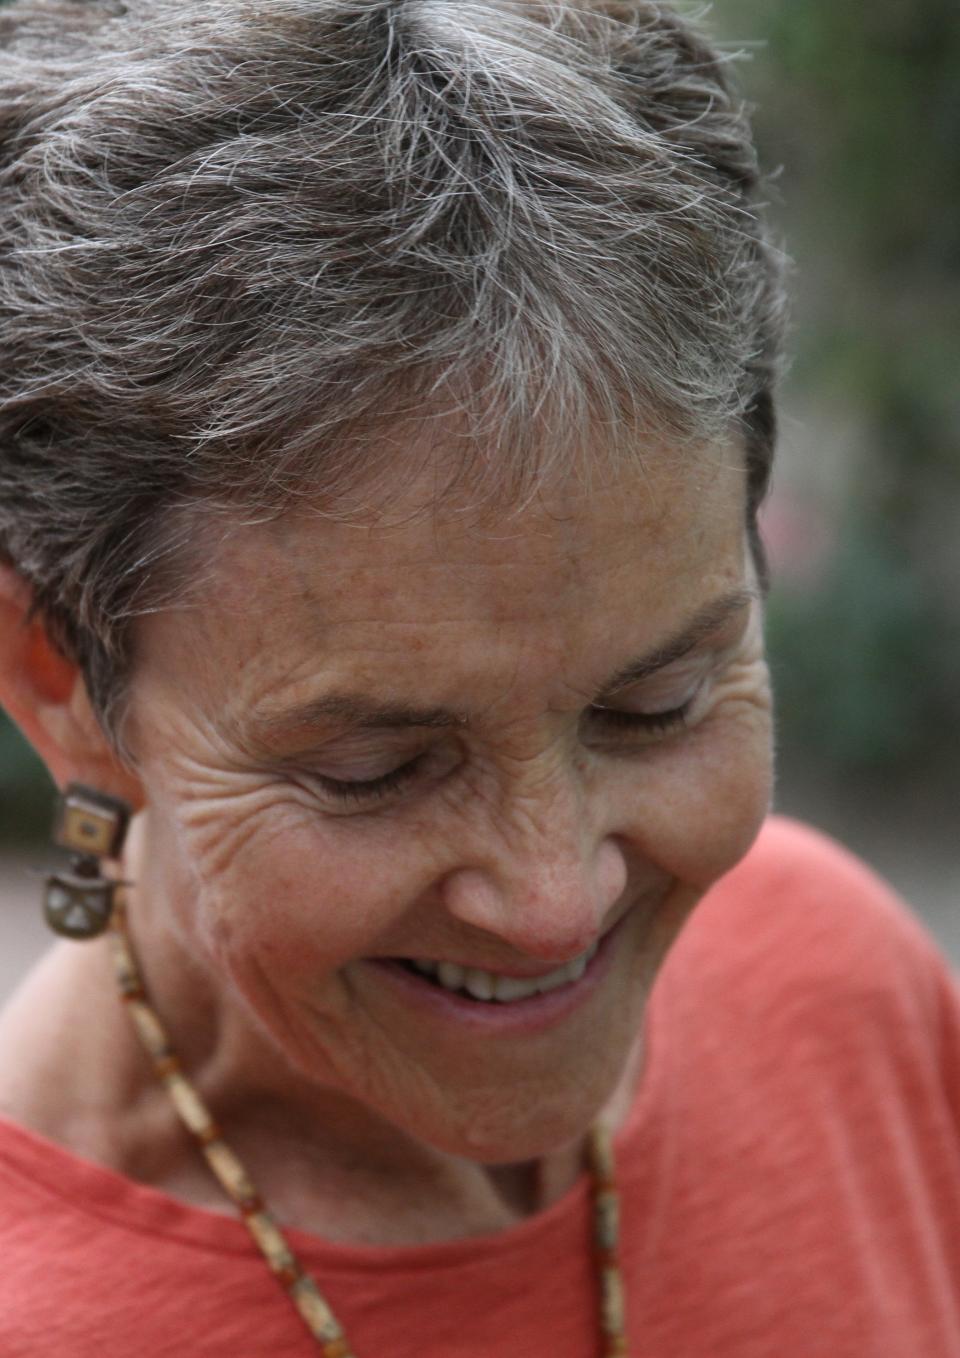 An image from the New Day film States of Grace. Dr. Grace Dammann closes her eyes and smiles towards the ground, her body tilted slightly. Her gray and white hair is short and she wears earrings, a necklace and a long sleeved shirt. The background is full of blurred out foliage.